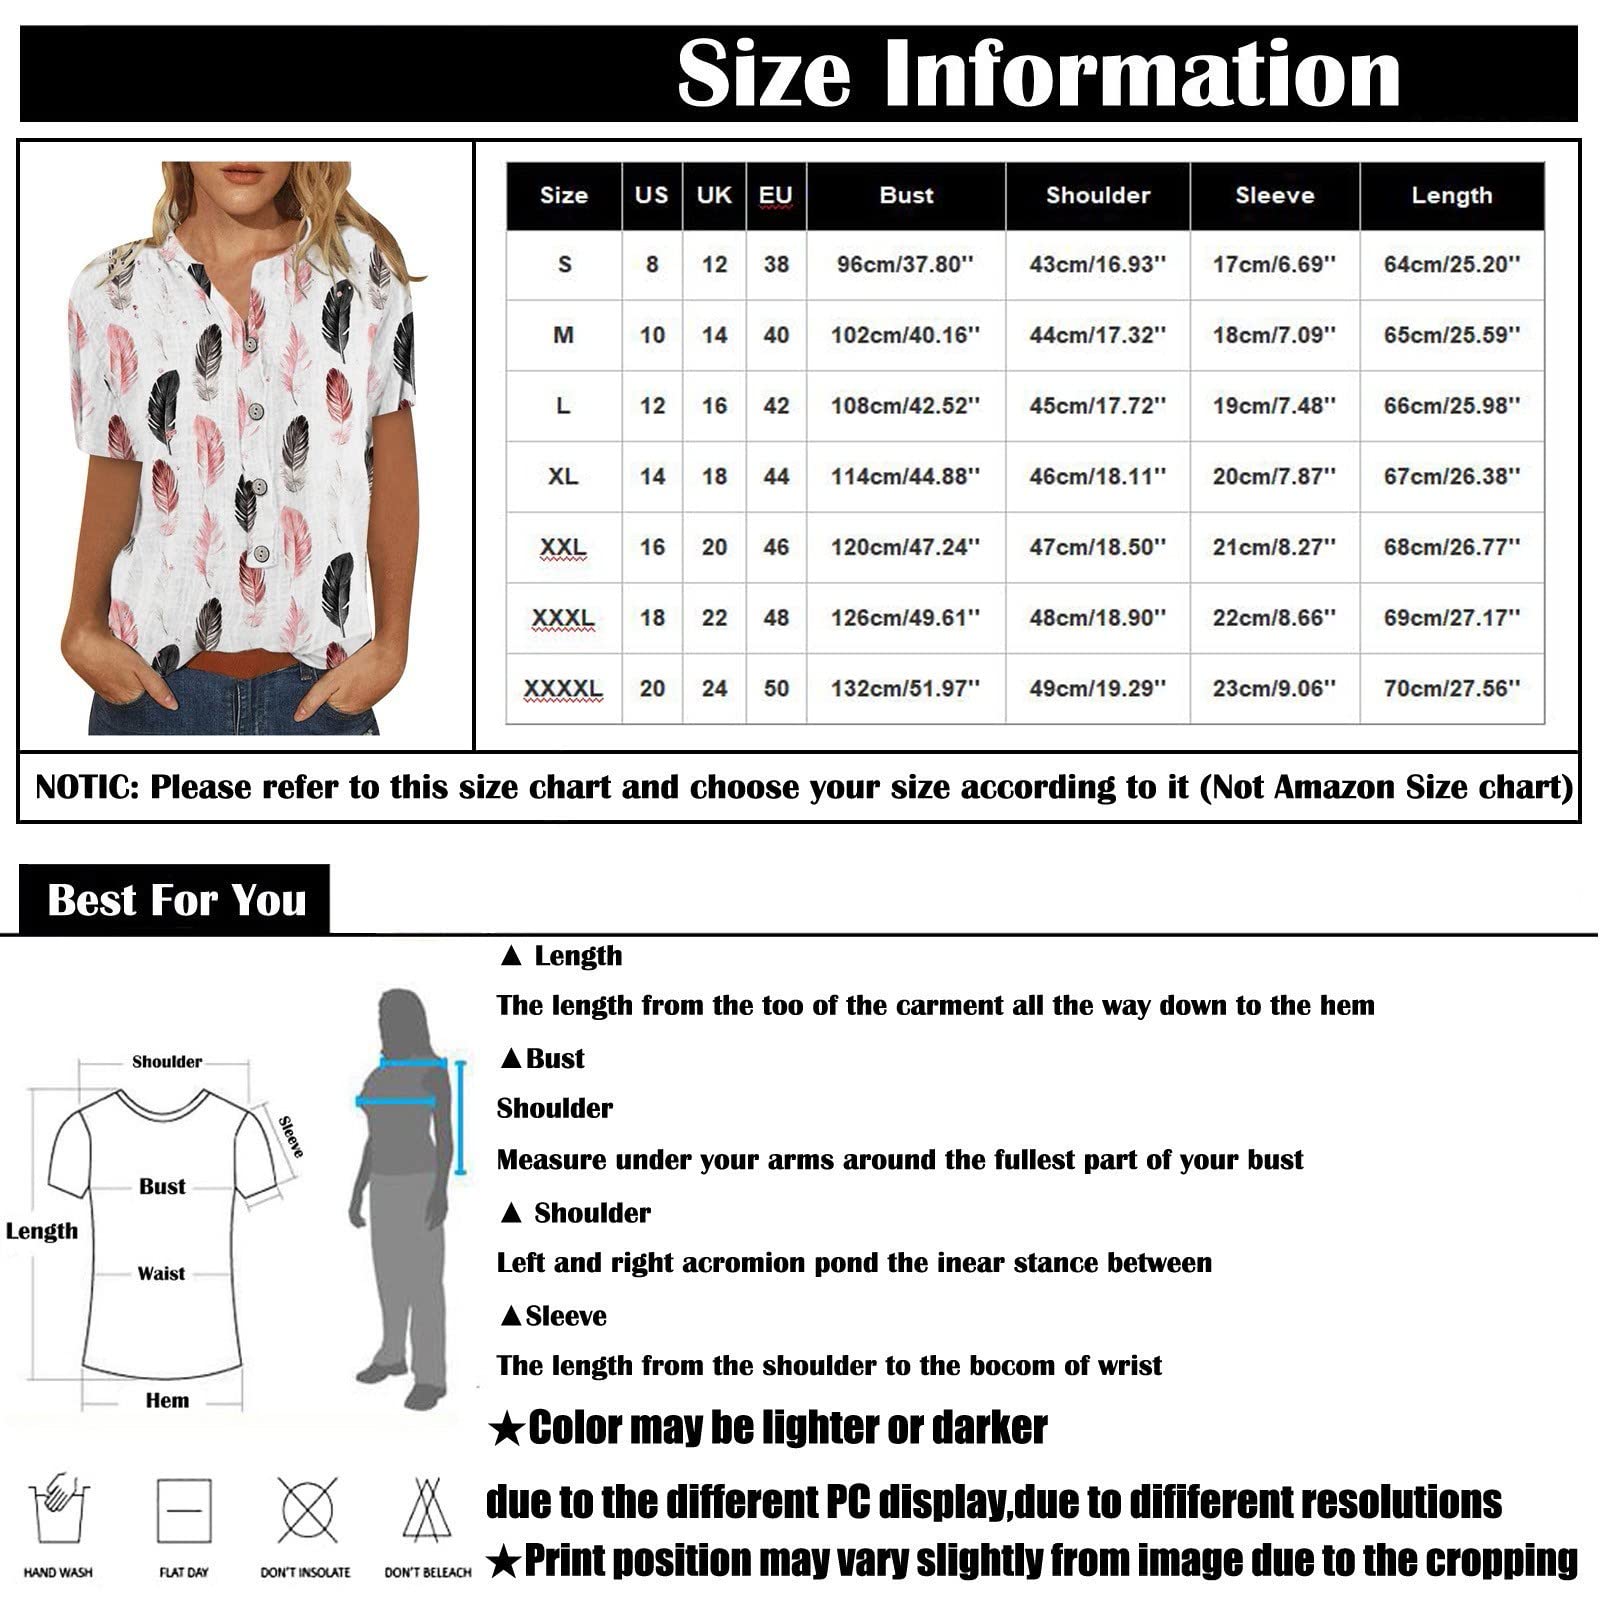 Summer Tops for Women Floral Pattern Plus Size Blouses for Women V-Neck Short Sleeve Comfy Dressy Oversized Tshirts